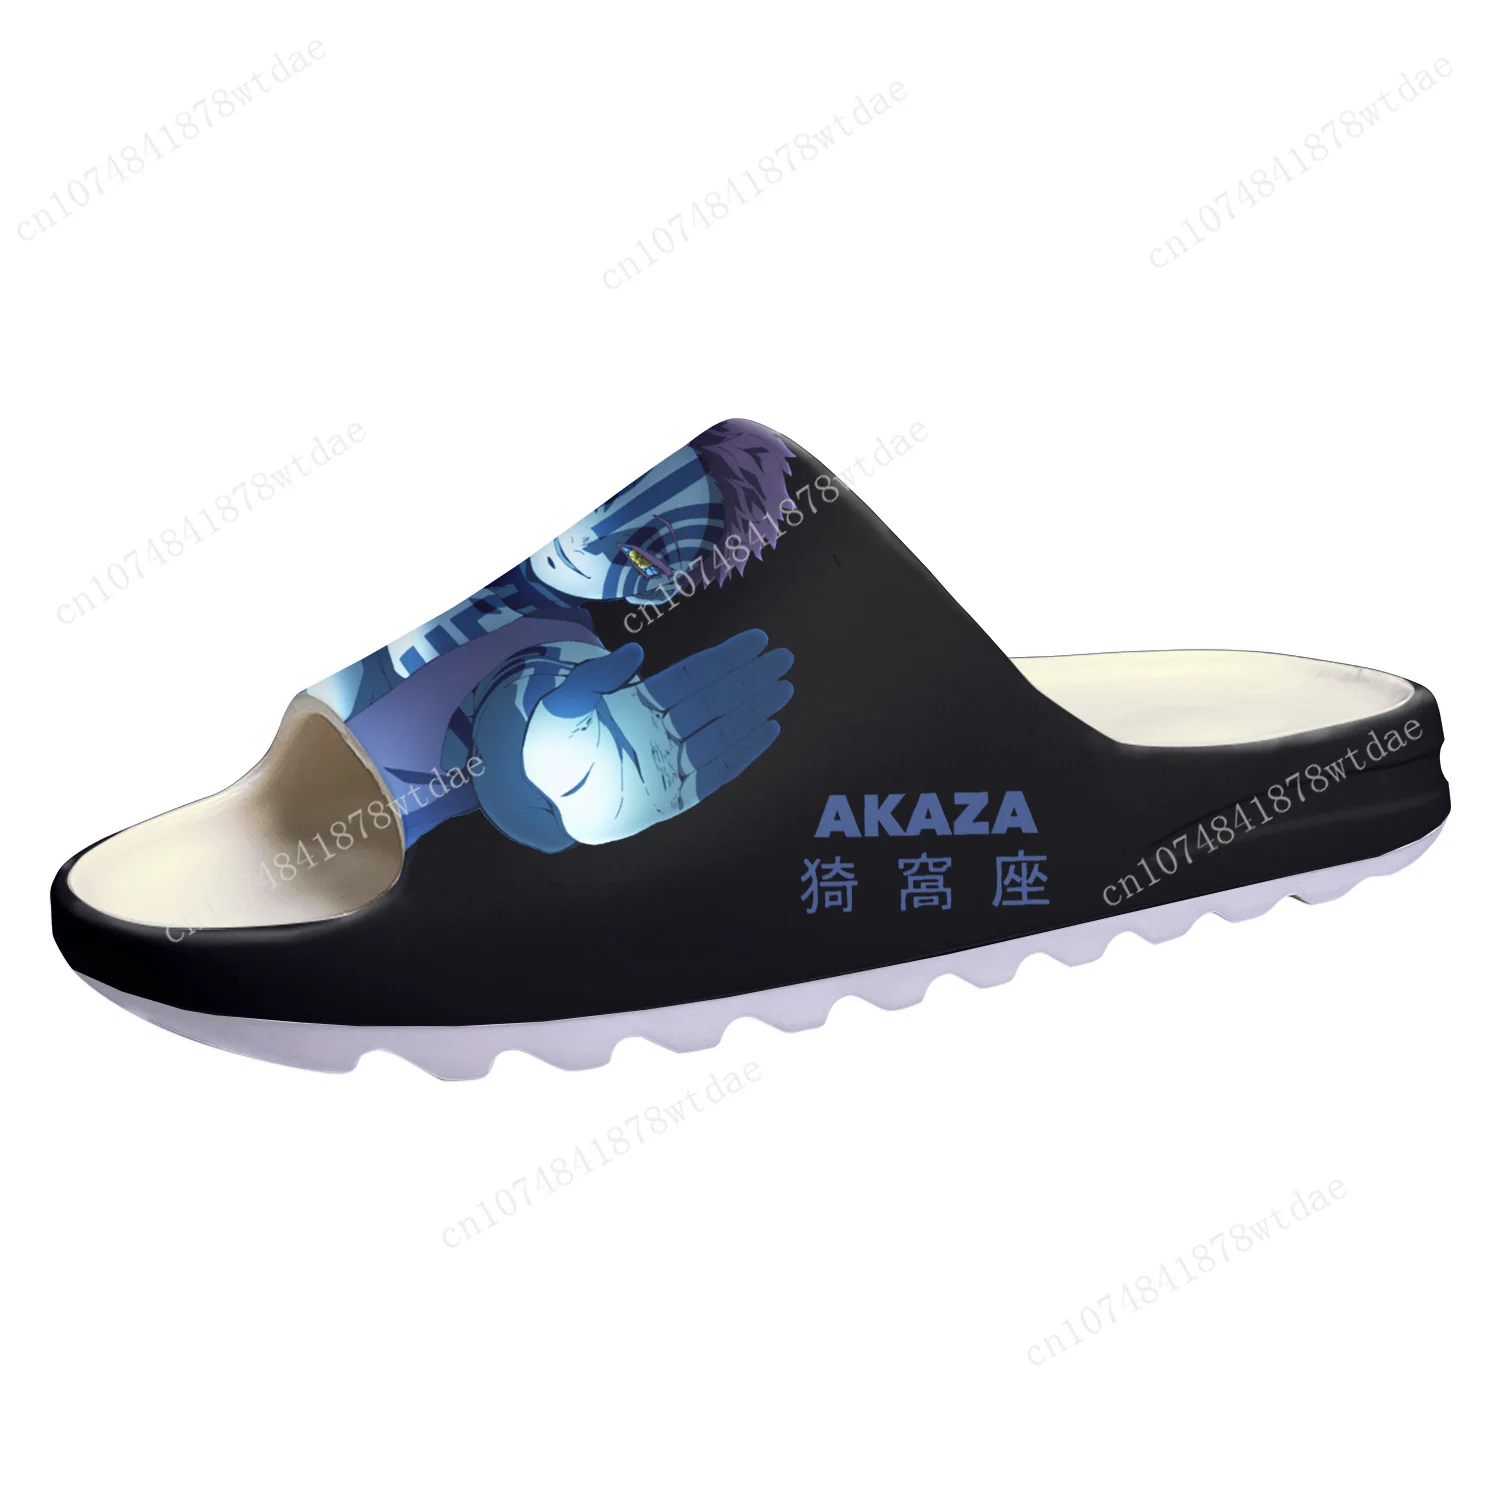 

Akaza Soft Sole Sllipers Demon Slayer Mens Womens Teenager Home Clogs Step In Water Shoes on Shit Manga Anime Customize Sandals